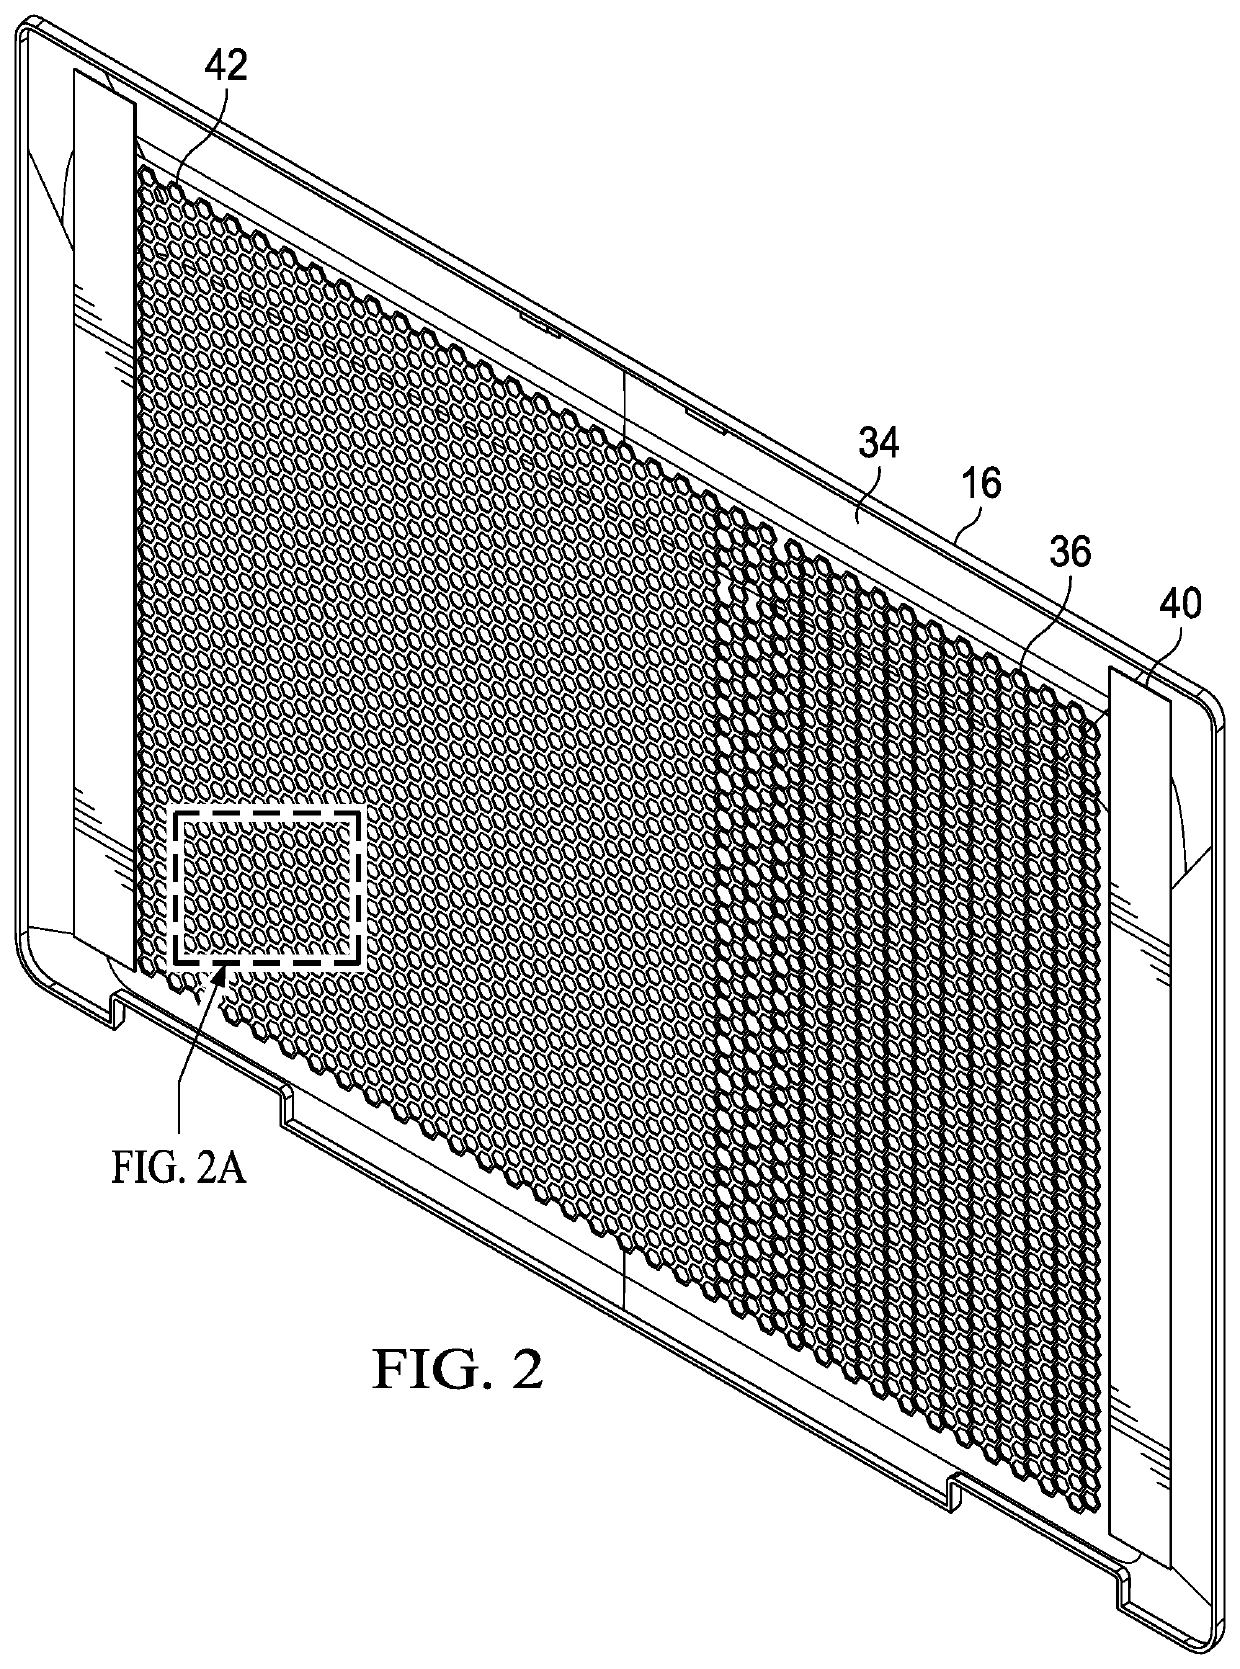 Ultra thin information handling system housing with hybrid assembly